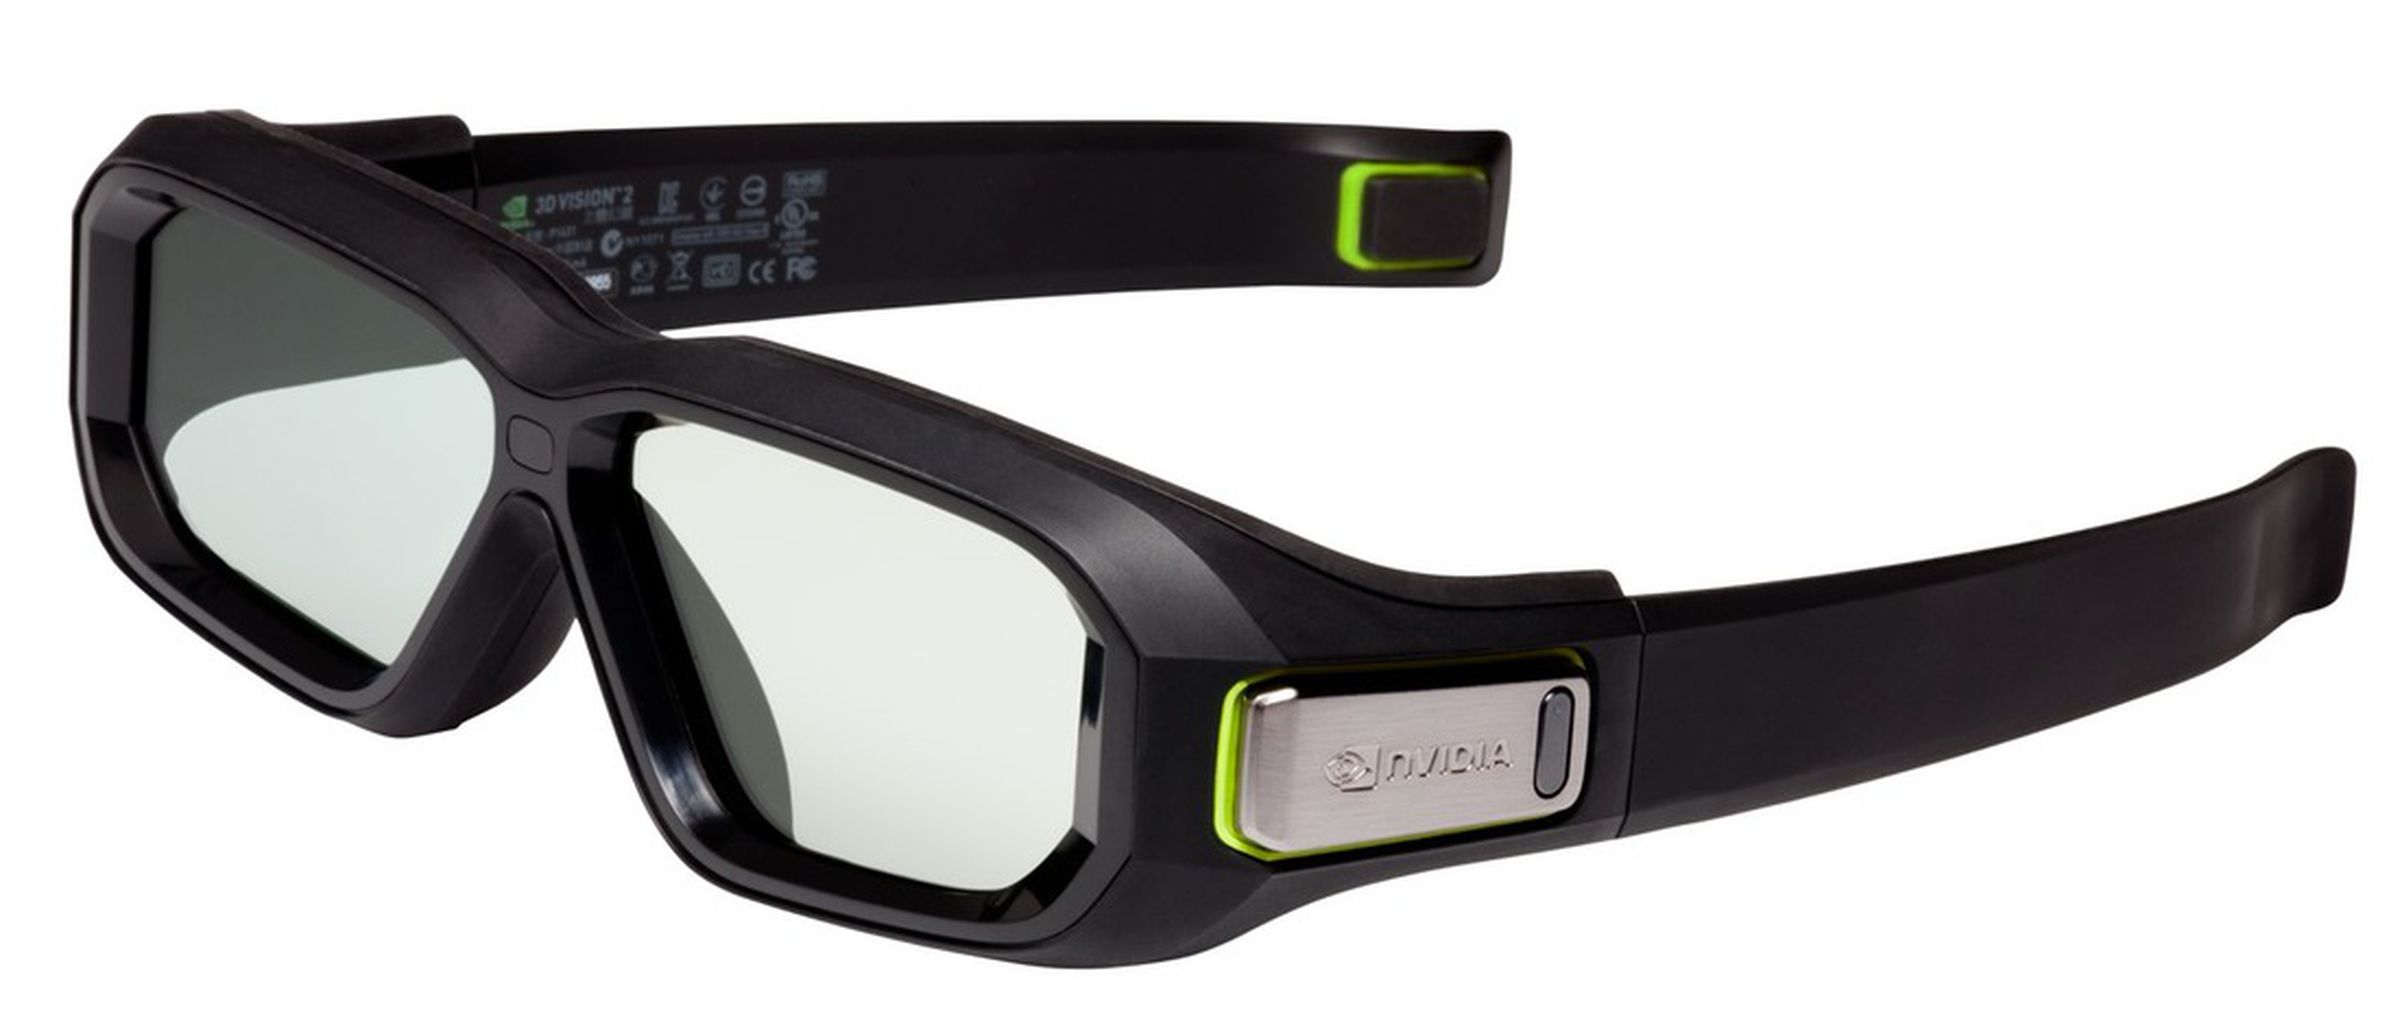 The Nvidia 3D Vision glasses were “shutter glasses” designed to work with 3D monitors; the monitors would rapidly alternate between left-eye and right-eye images while the glasses block the eye whose image isn’t being displayed.